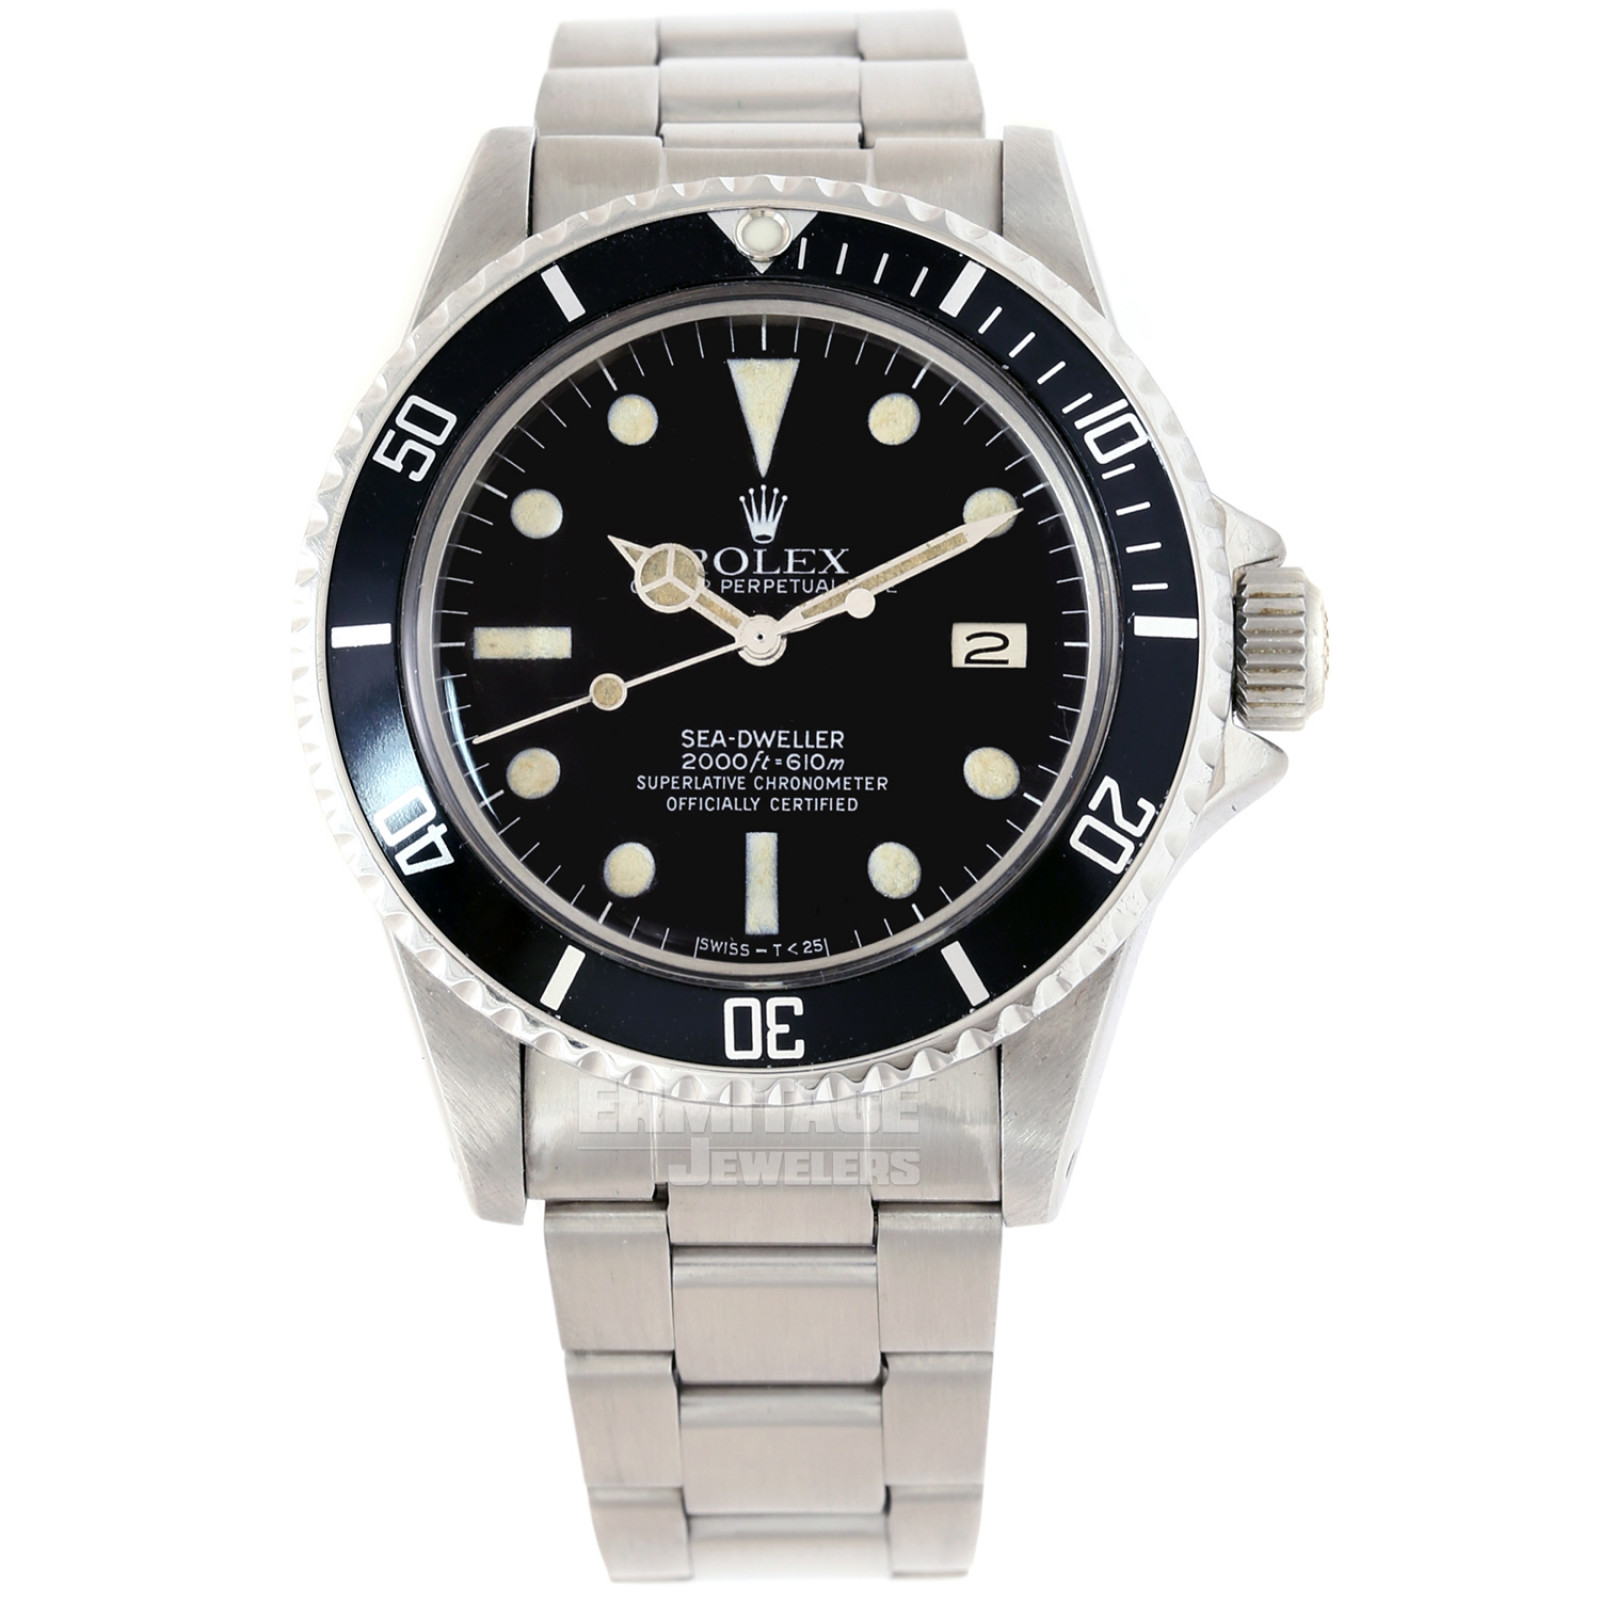 Double Red Rolex Sea-Dweller Mark IV